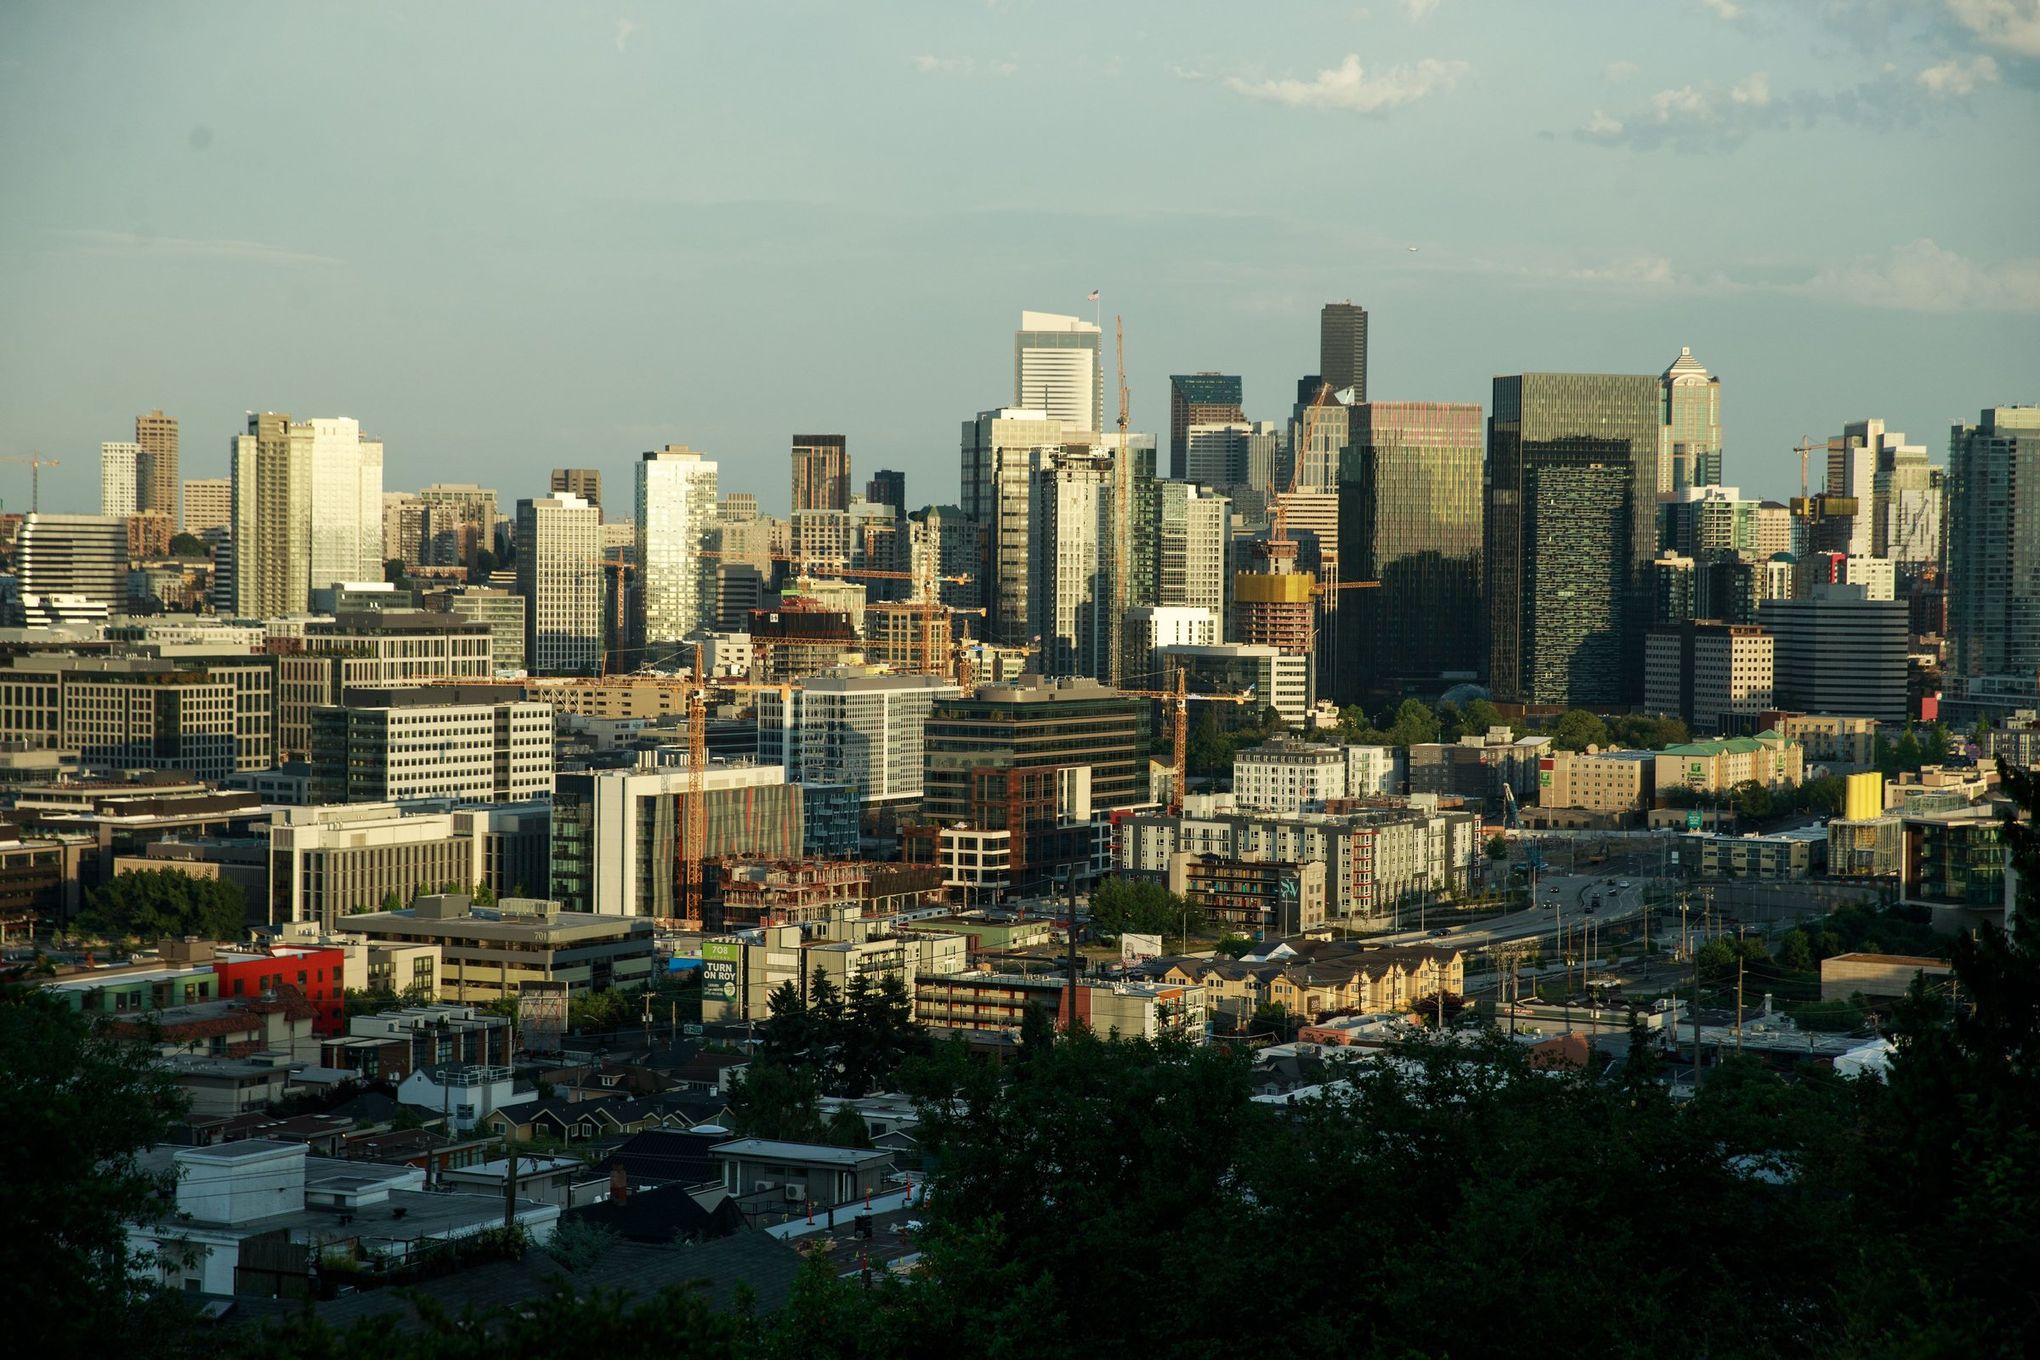 Seattle just one of 5 big metros last year that had more people move here  than leave, census data show